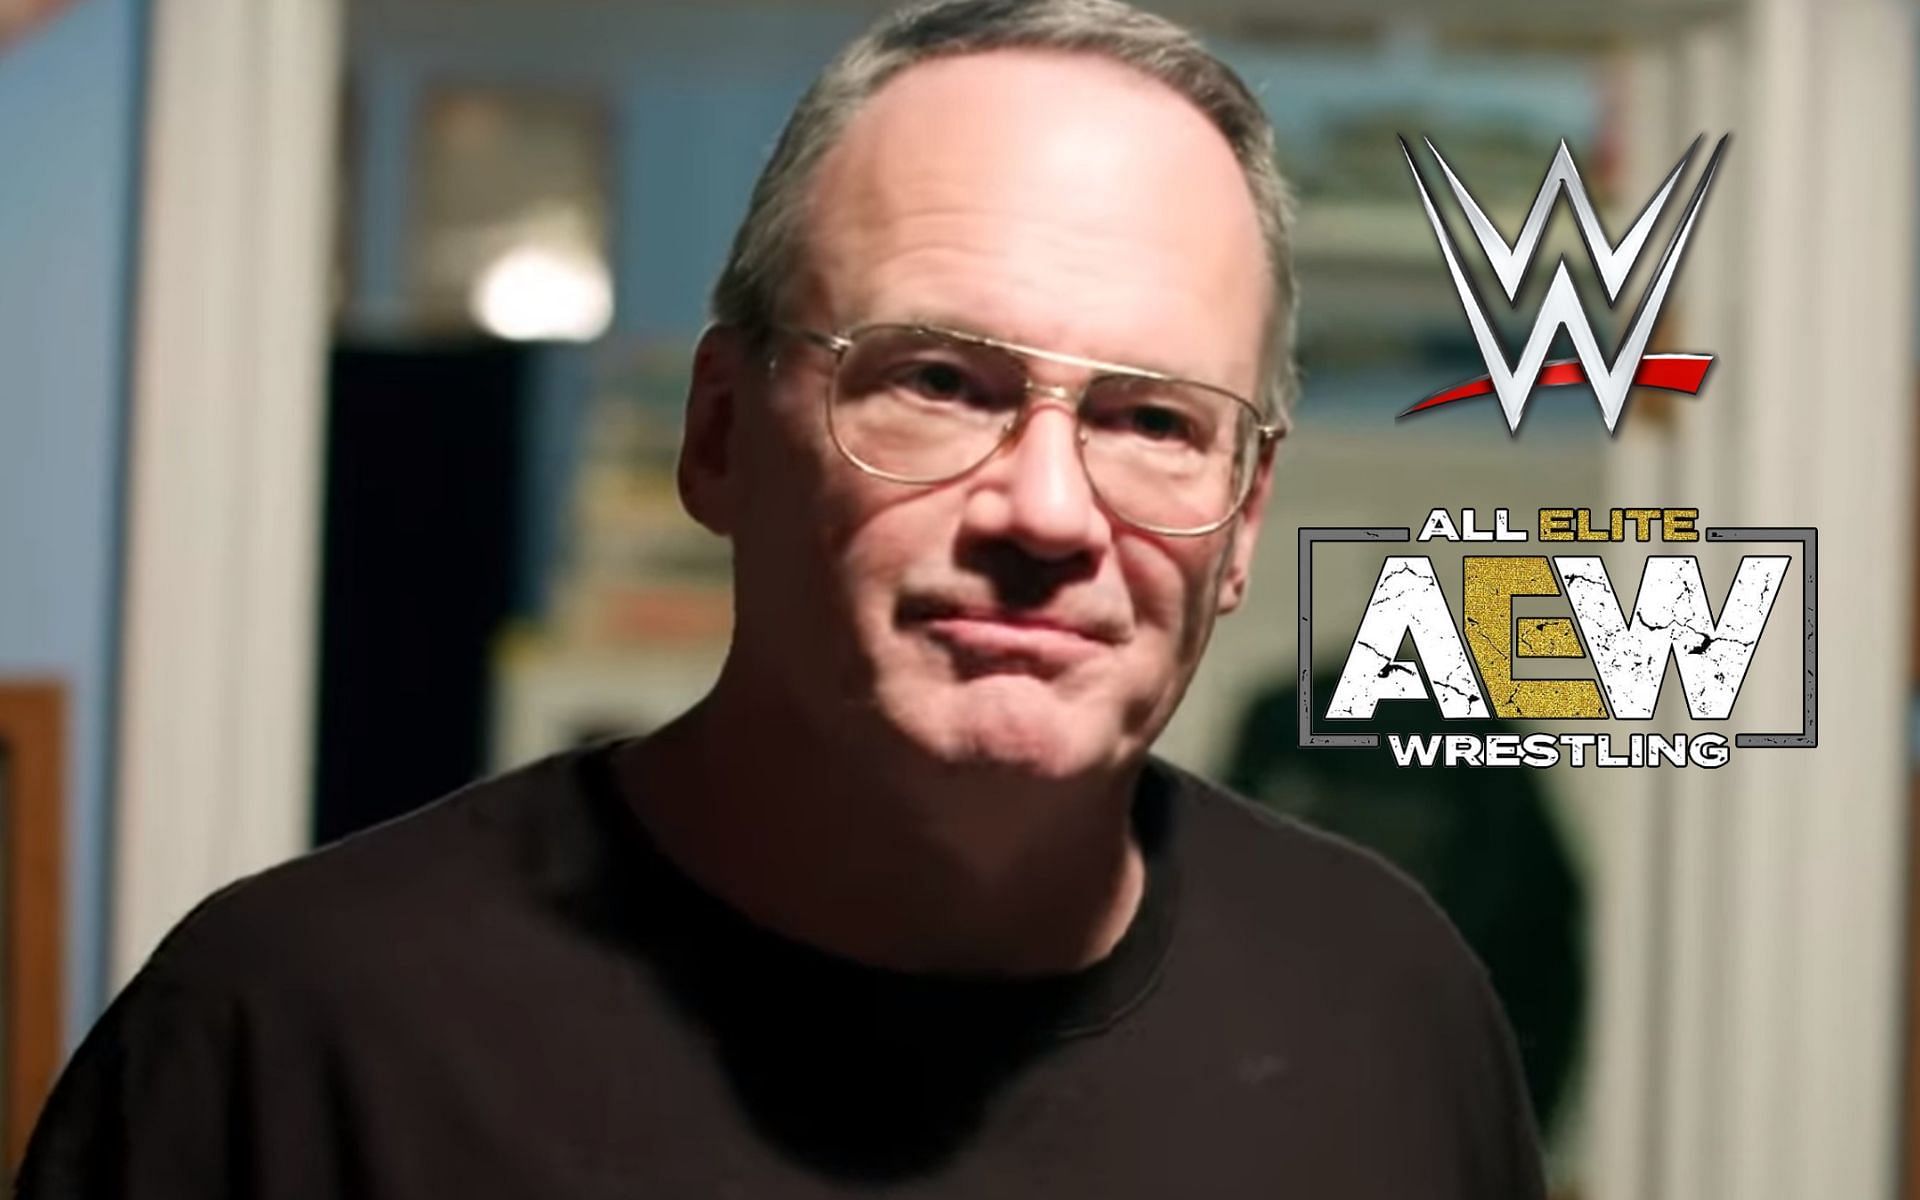 Jim Cornette says this former WWE talent has become an afterthought in AEW.